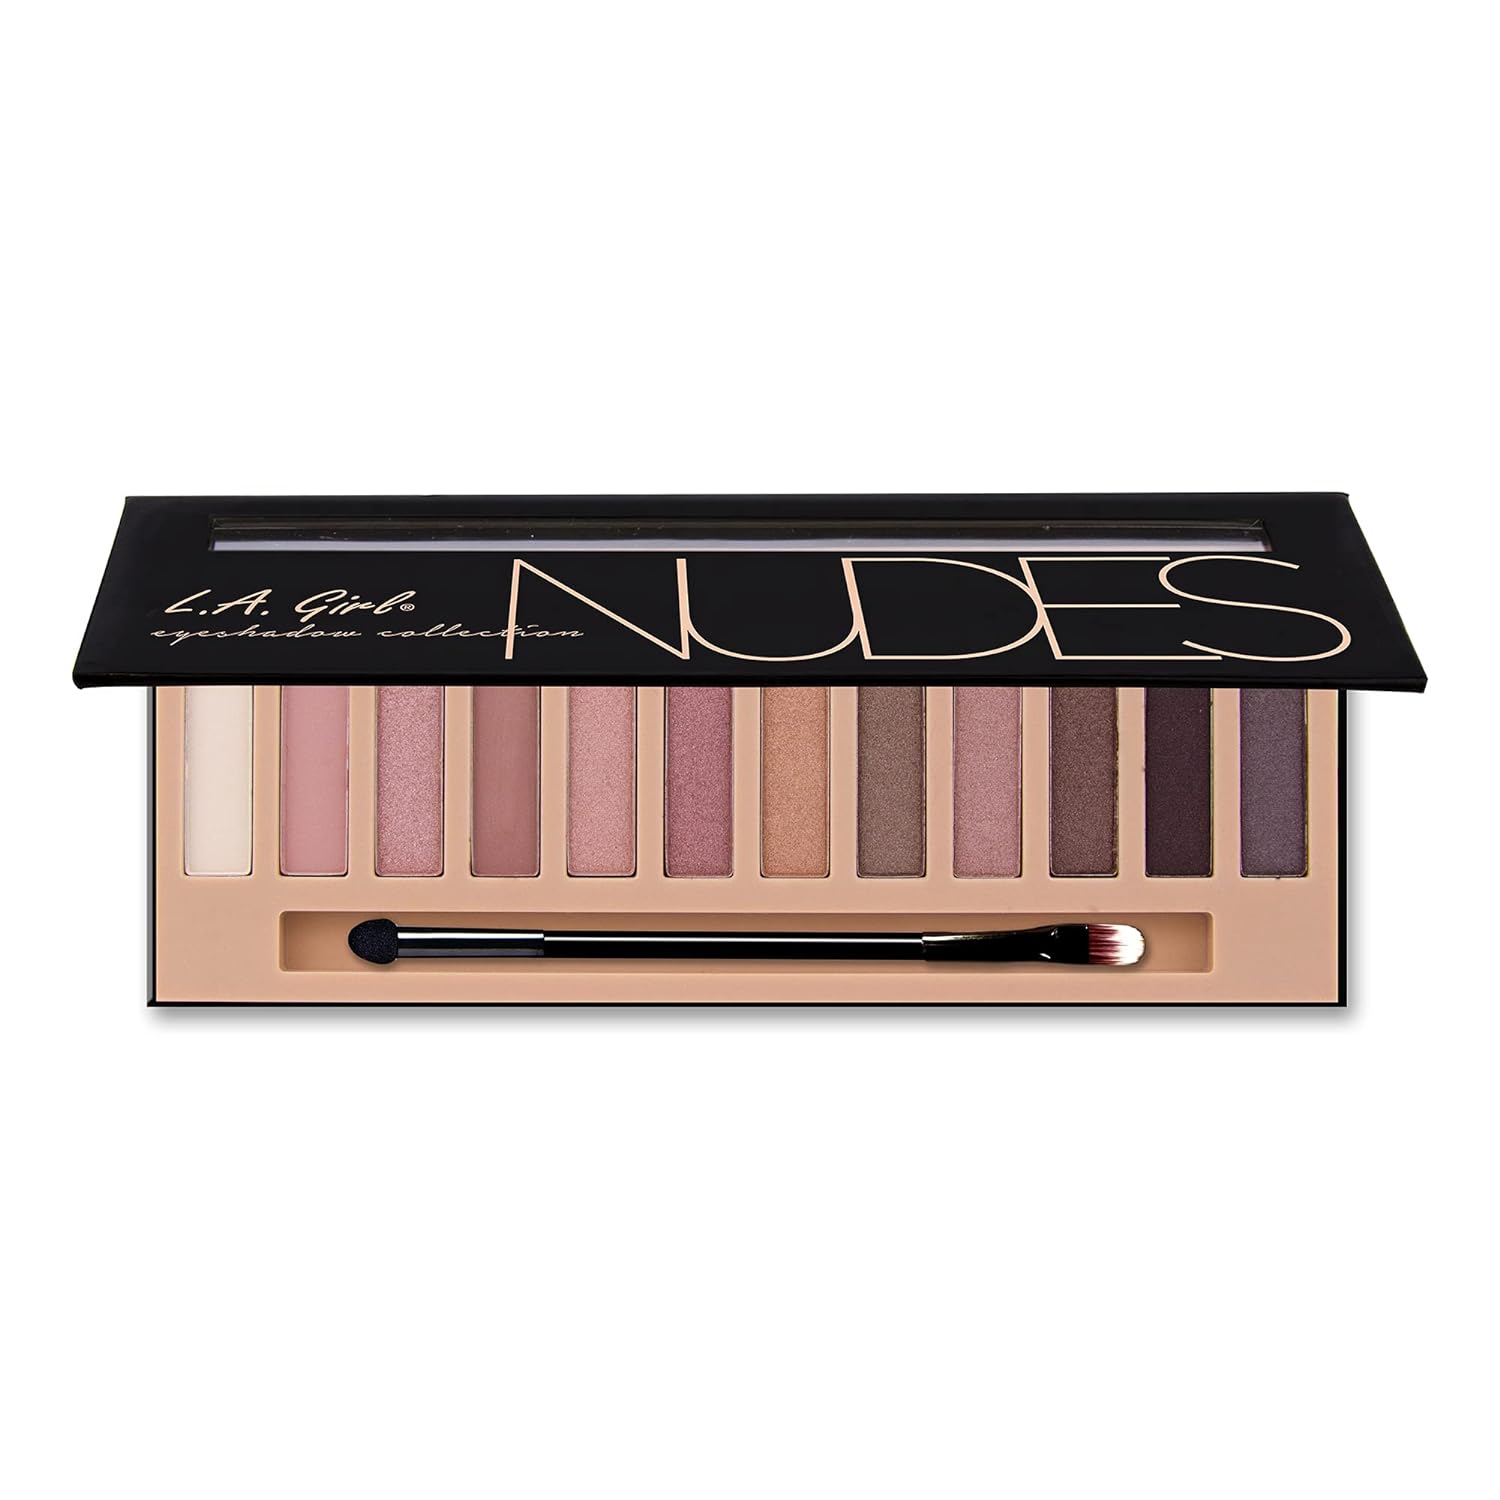 L.A. Girl Beauty Brick Eyeshadow Collection